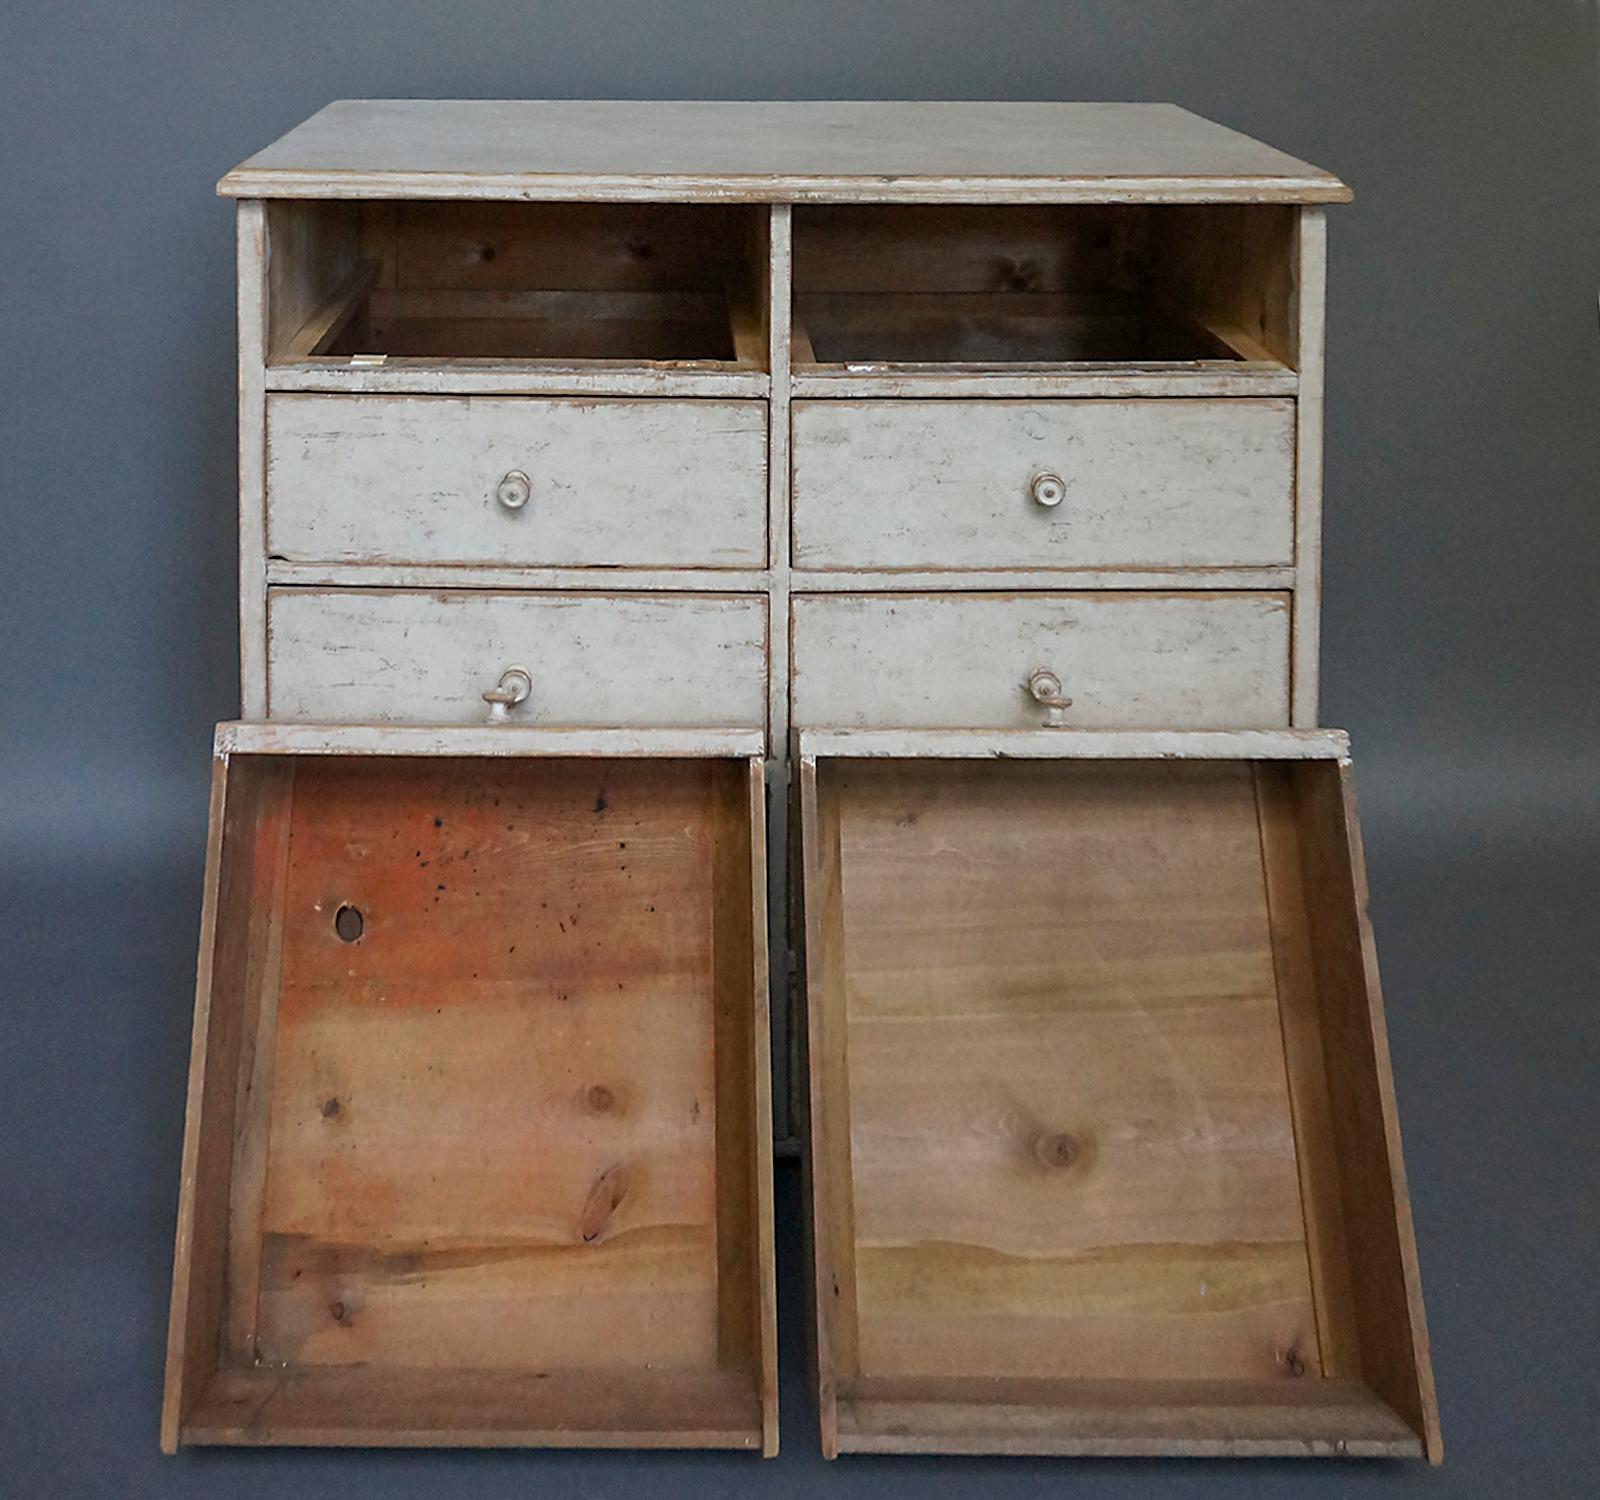 Swedish “bank of drawers,” circa 1860. Eight drawers in simple case with molded top and square bracket feet. All original with later paint.